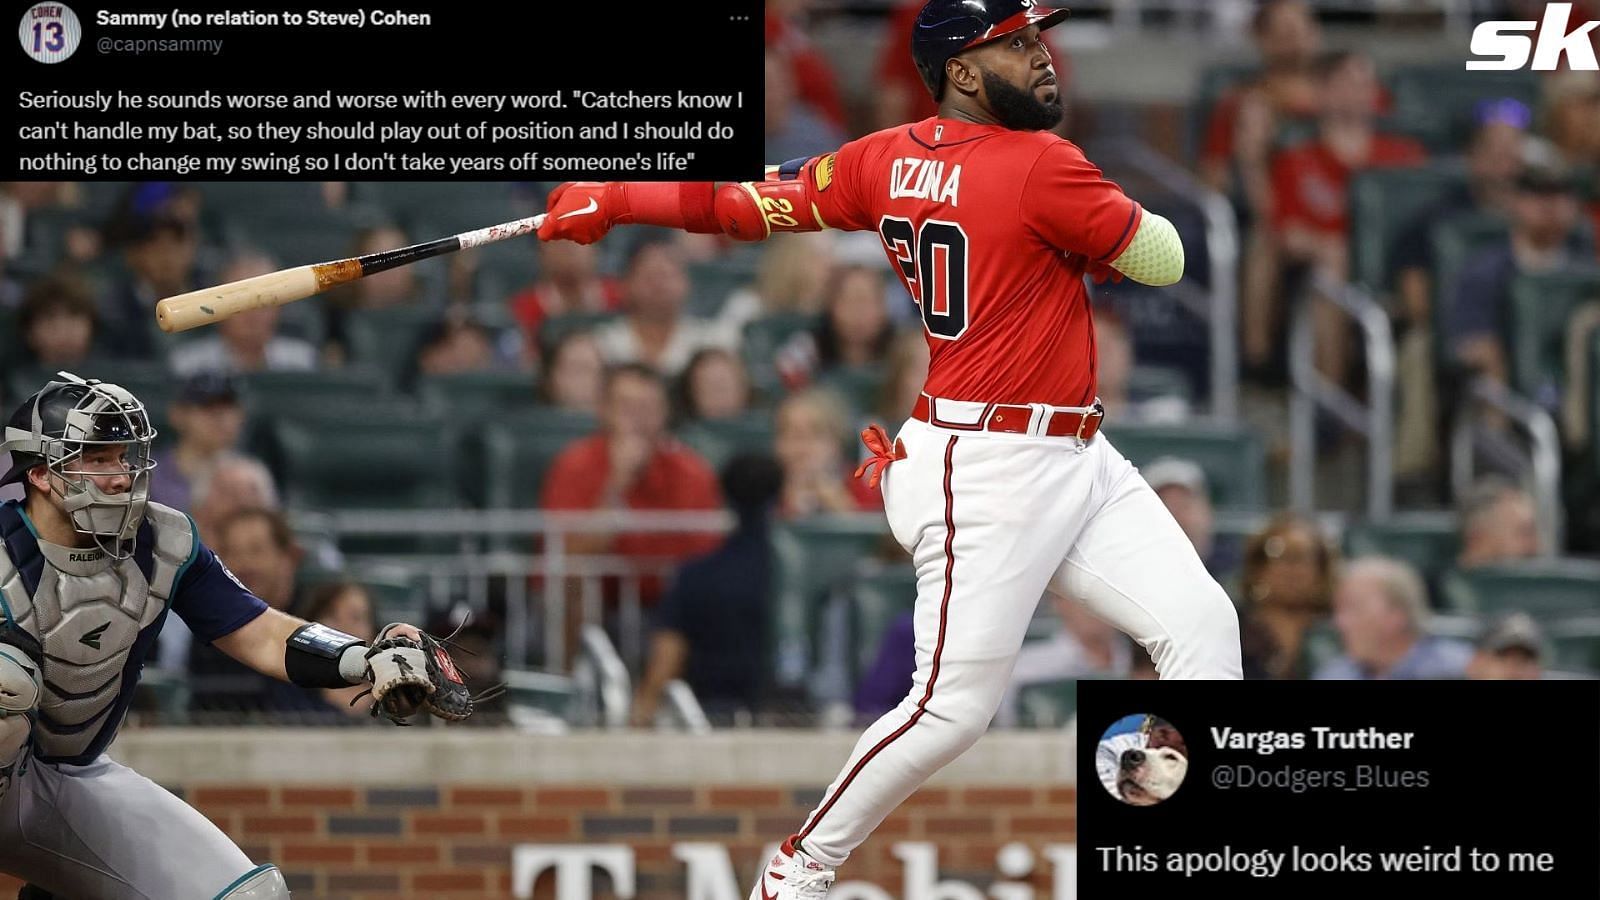 Marcell Ozuna is well-known for his exaggerated backswing